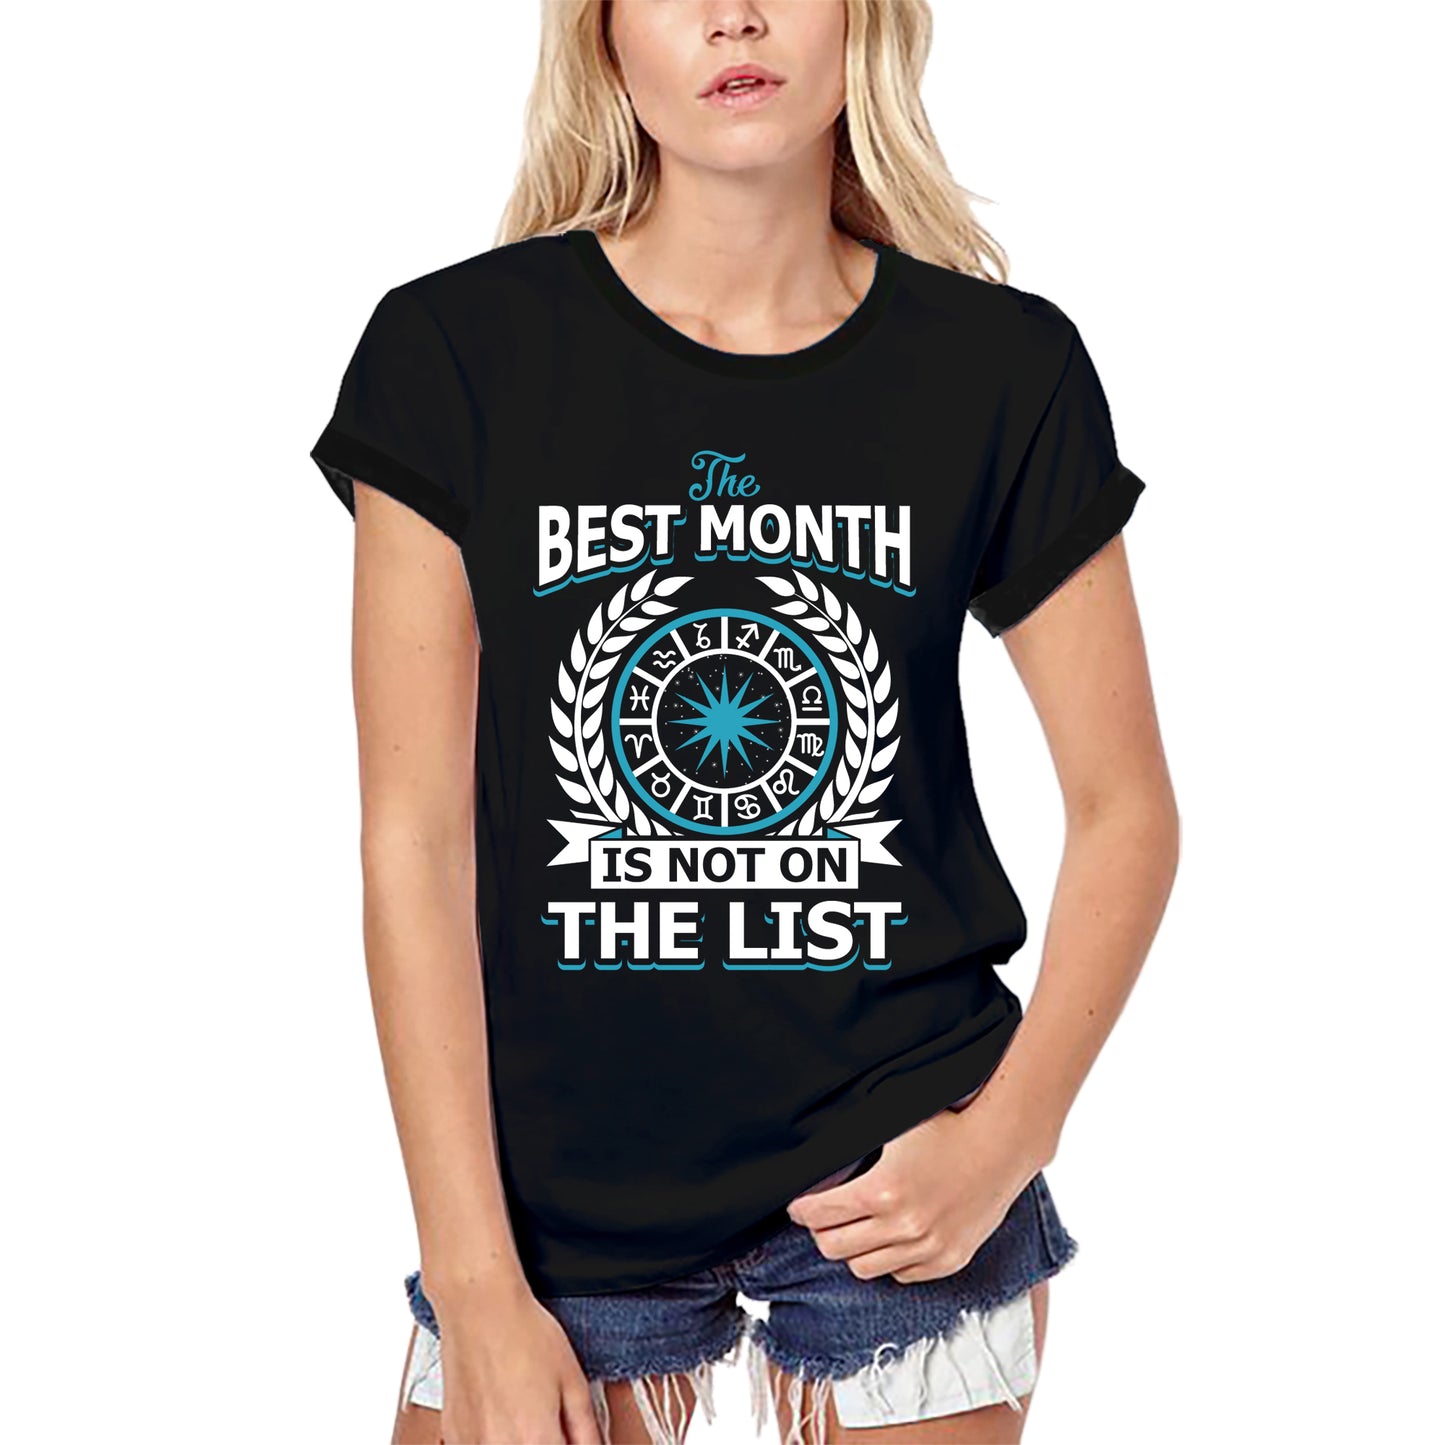 ULTRABASIC Women's Organic T-Shirt The Best Month is Not On the List - Funny Birthday Shirt